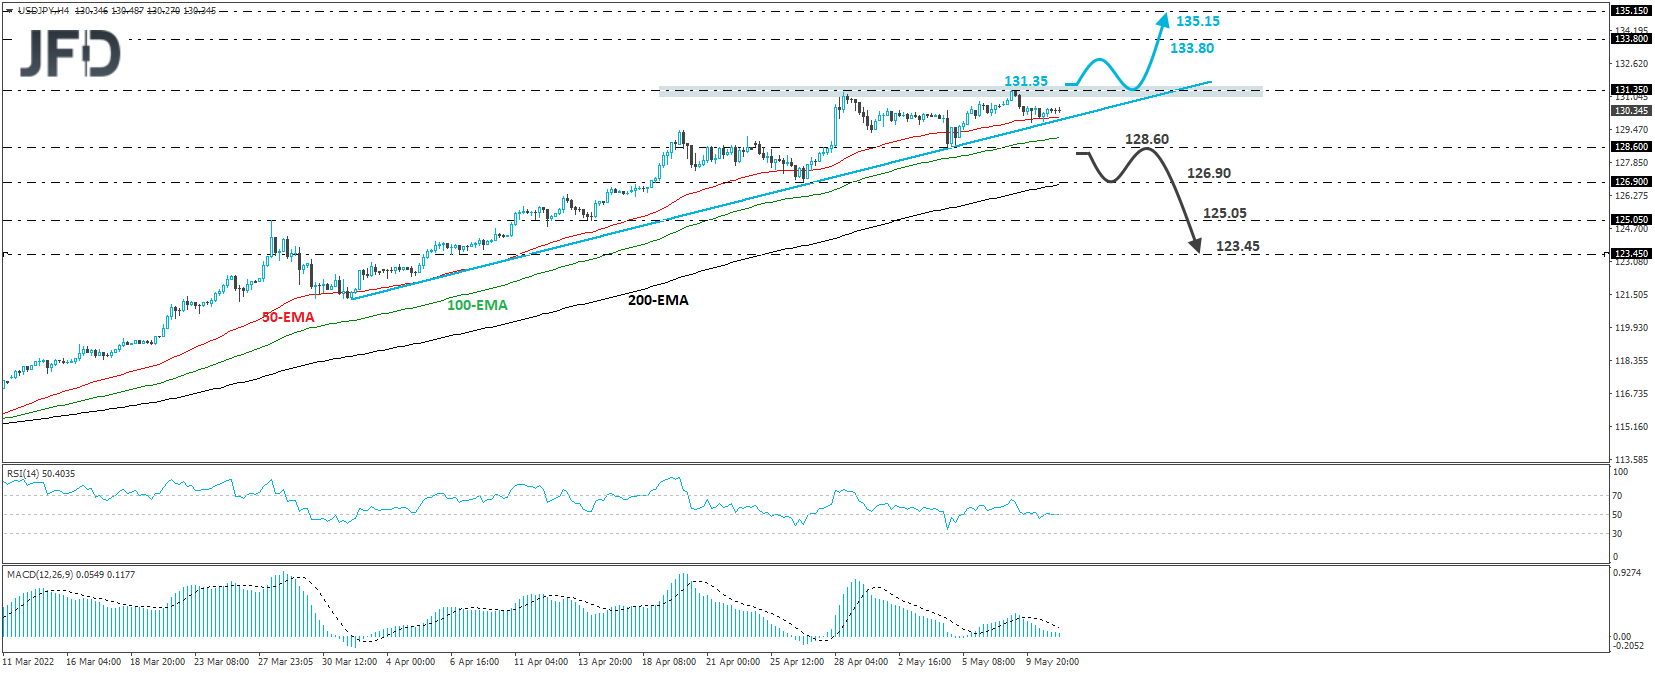 USD/JPY 4-hour chart technical analysis.